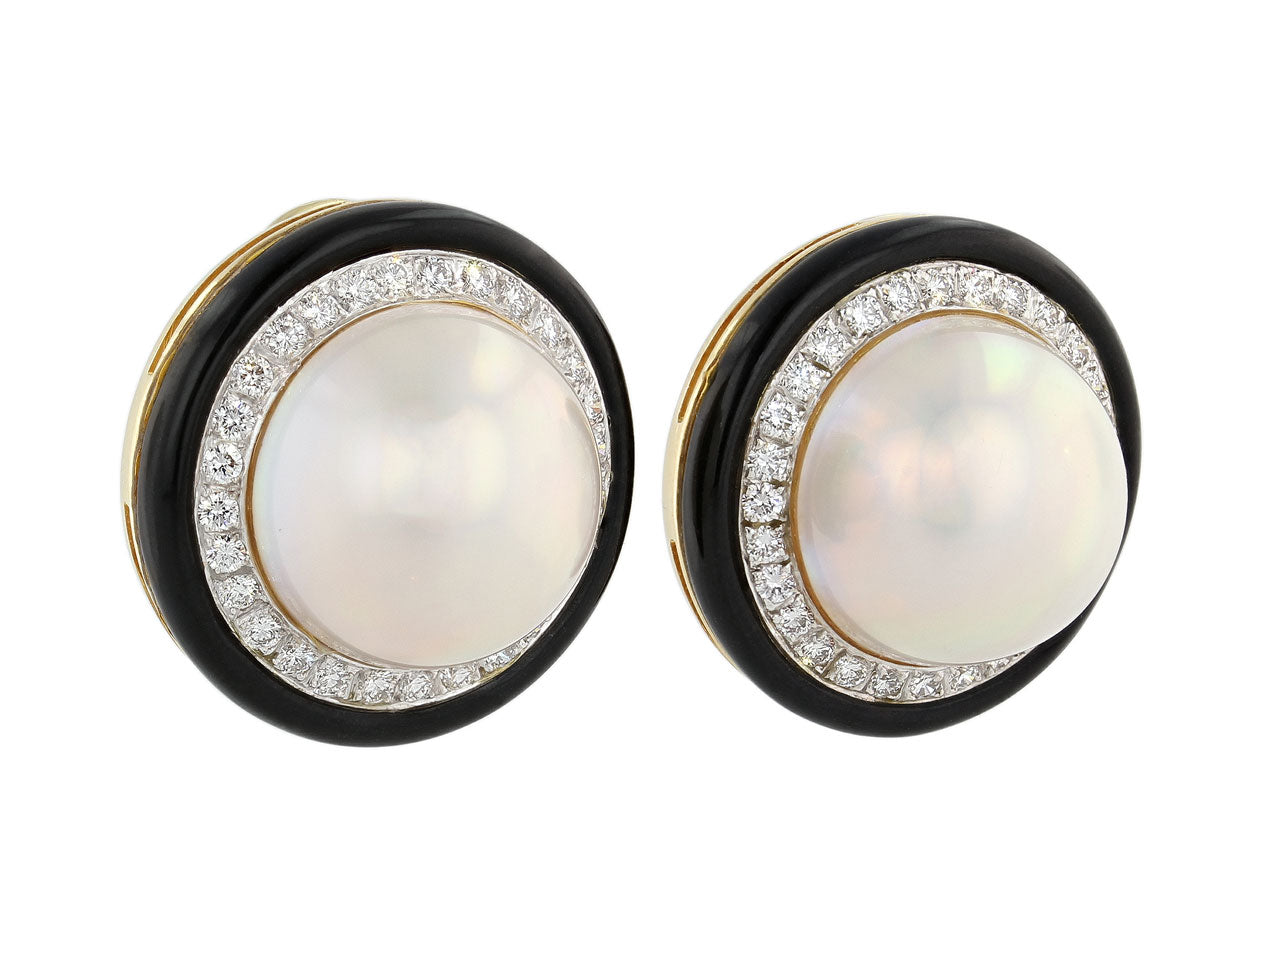 Mabe Pearl and Diamond Earrings in 18K Gold, by Trio